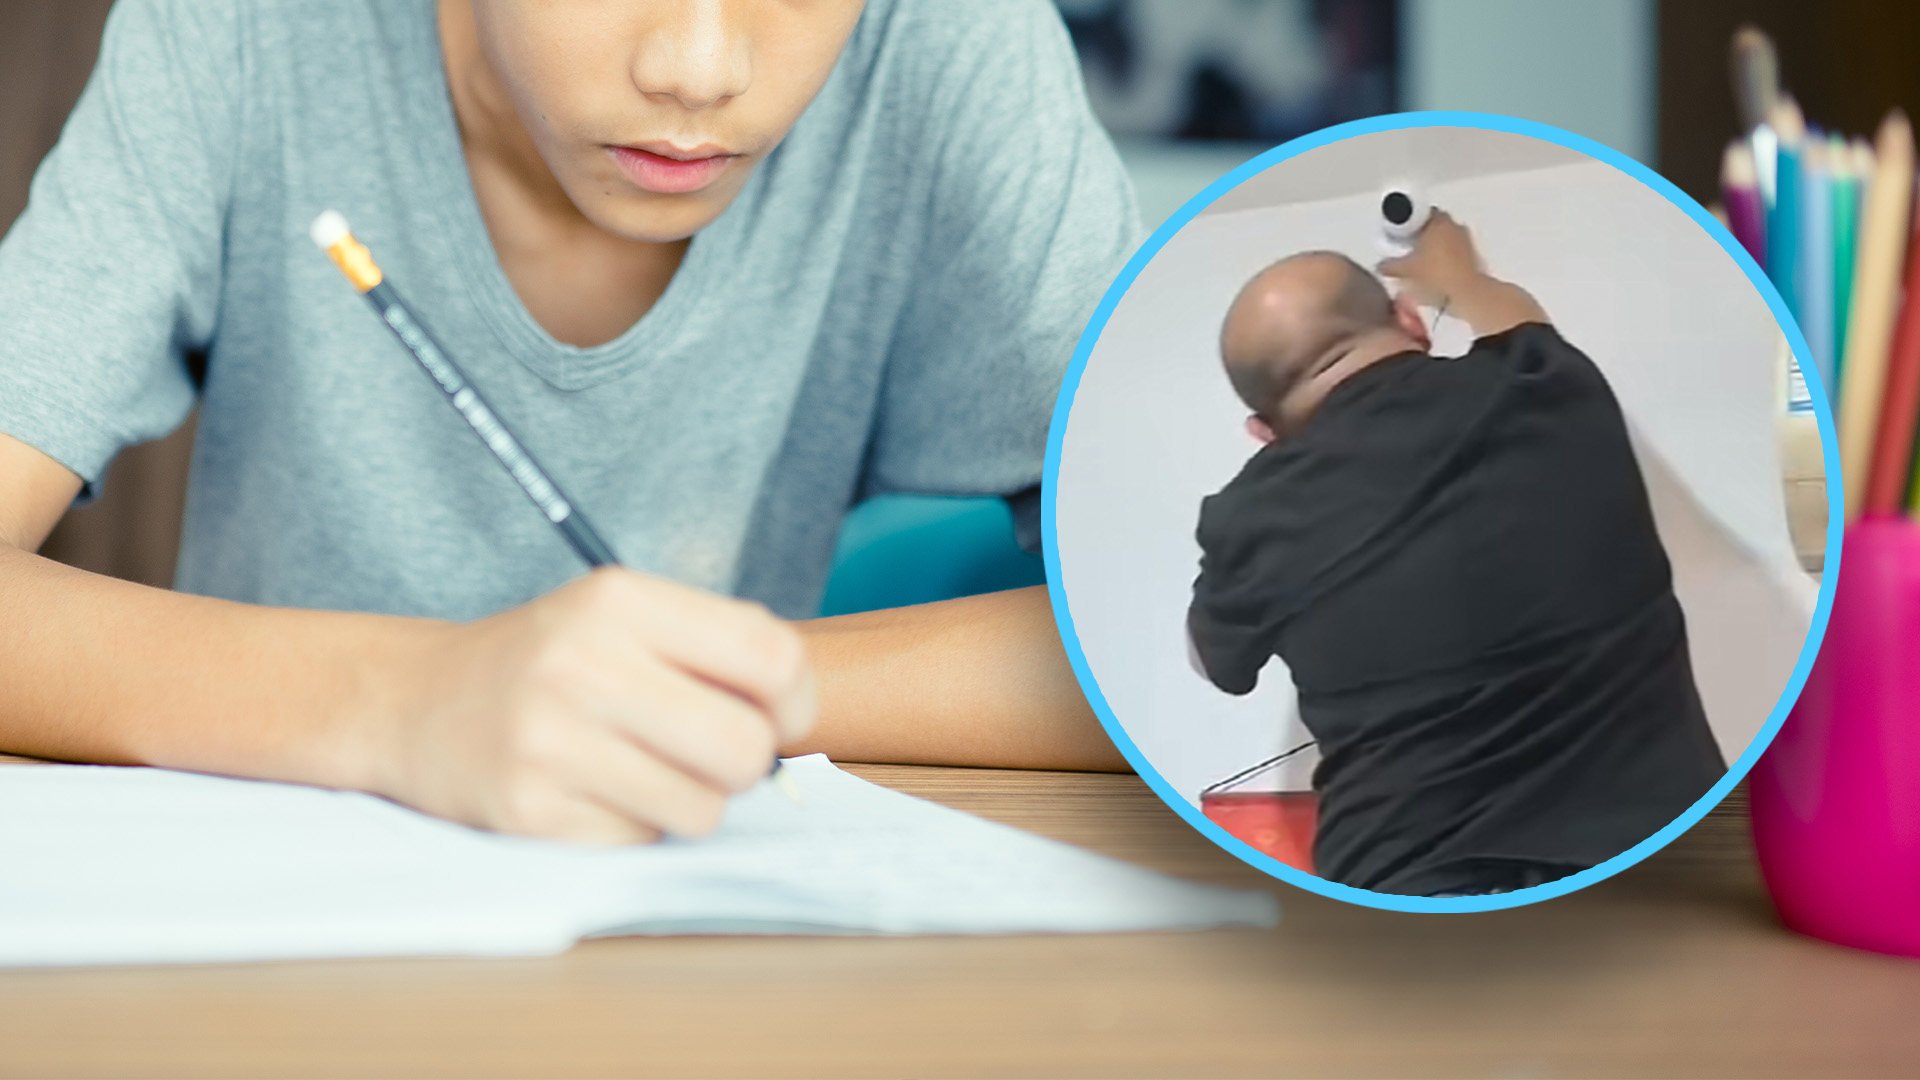 A mother and father in China have come under fire online for secretly spying on their son while he studied for a crucial examination. Photo: SCMP composite/Shutterstock/Weibo